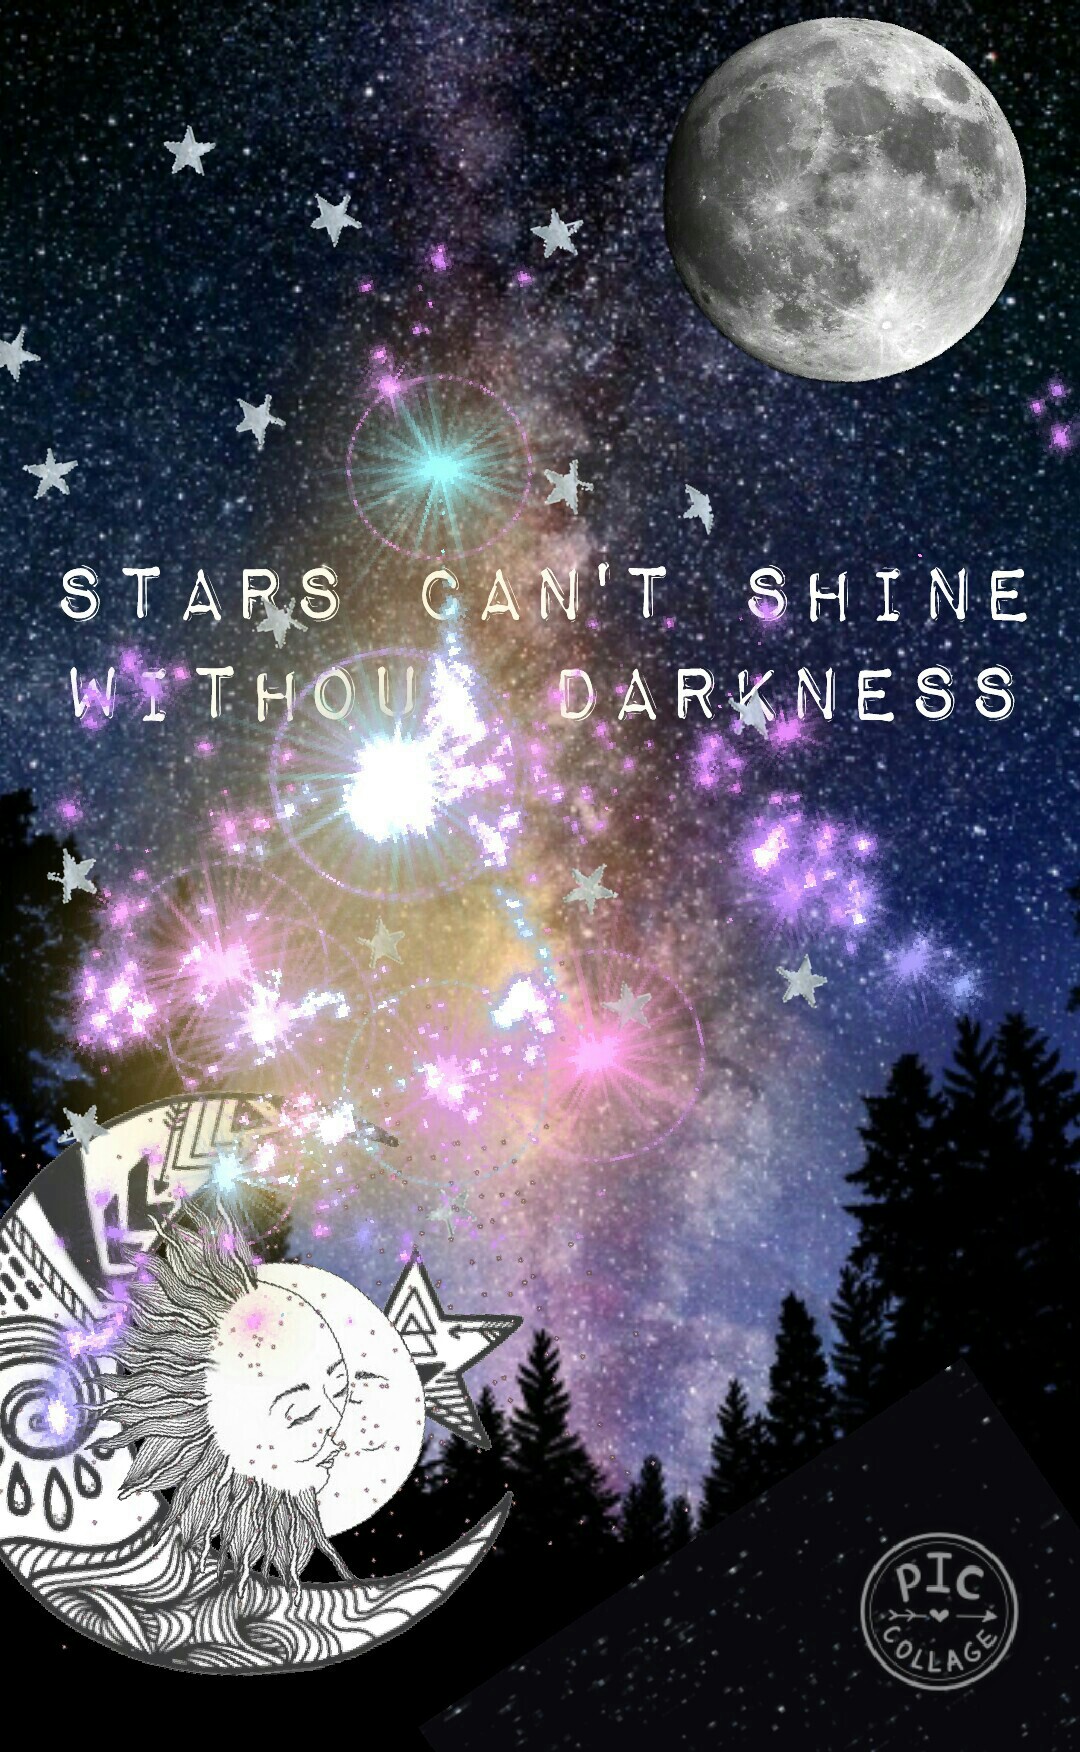 Stars can't shine
Without darkness